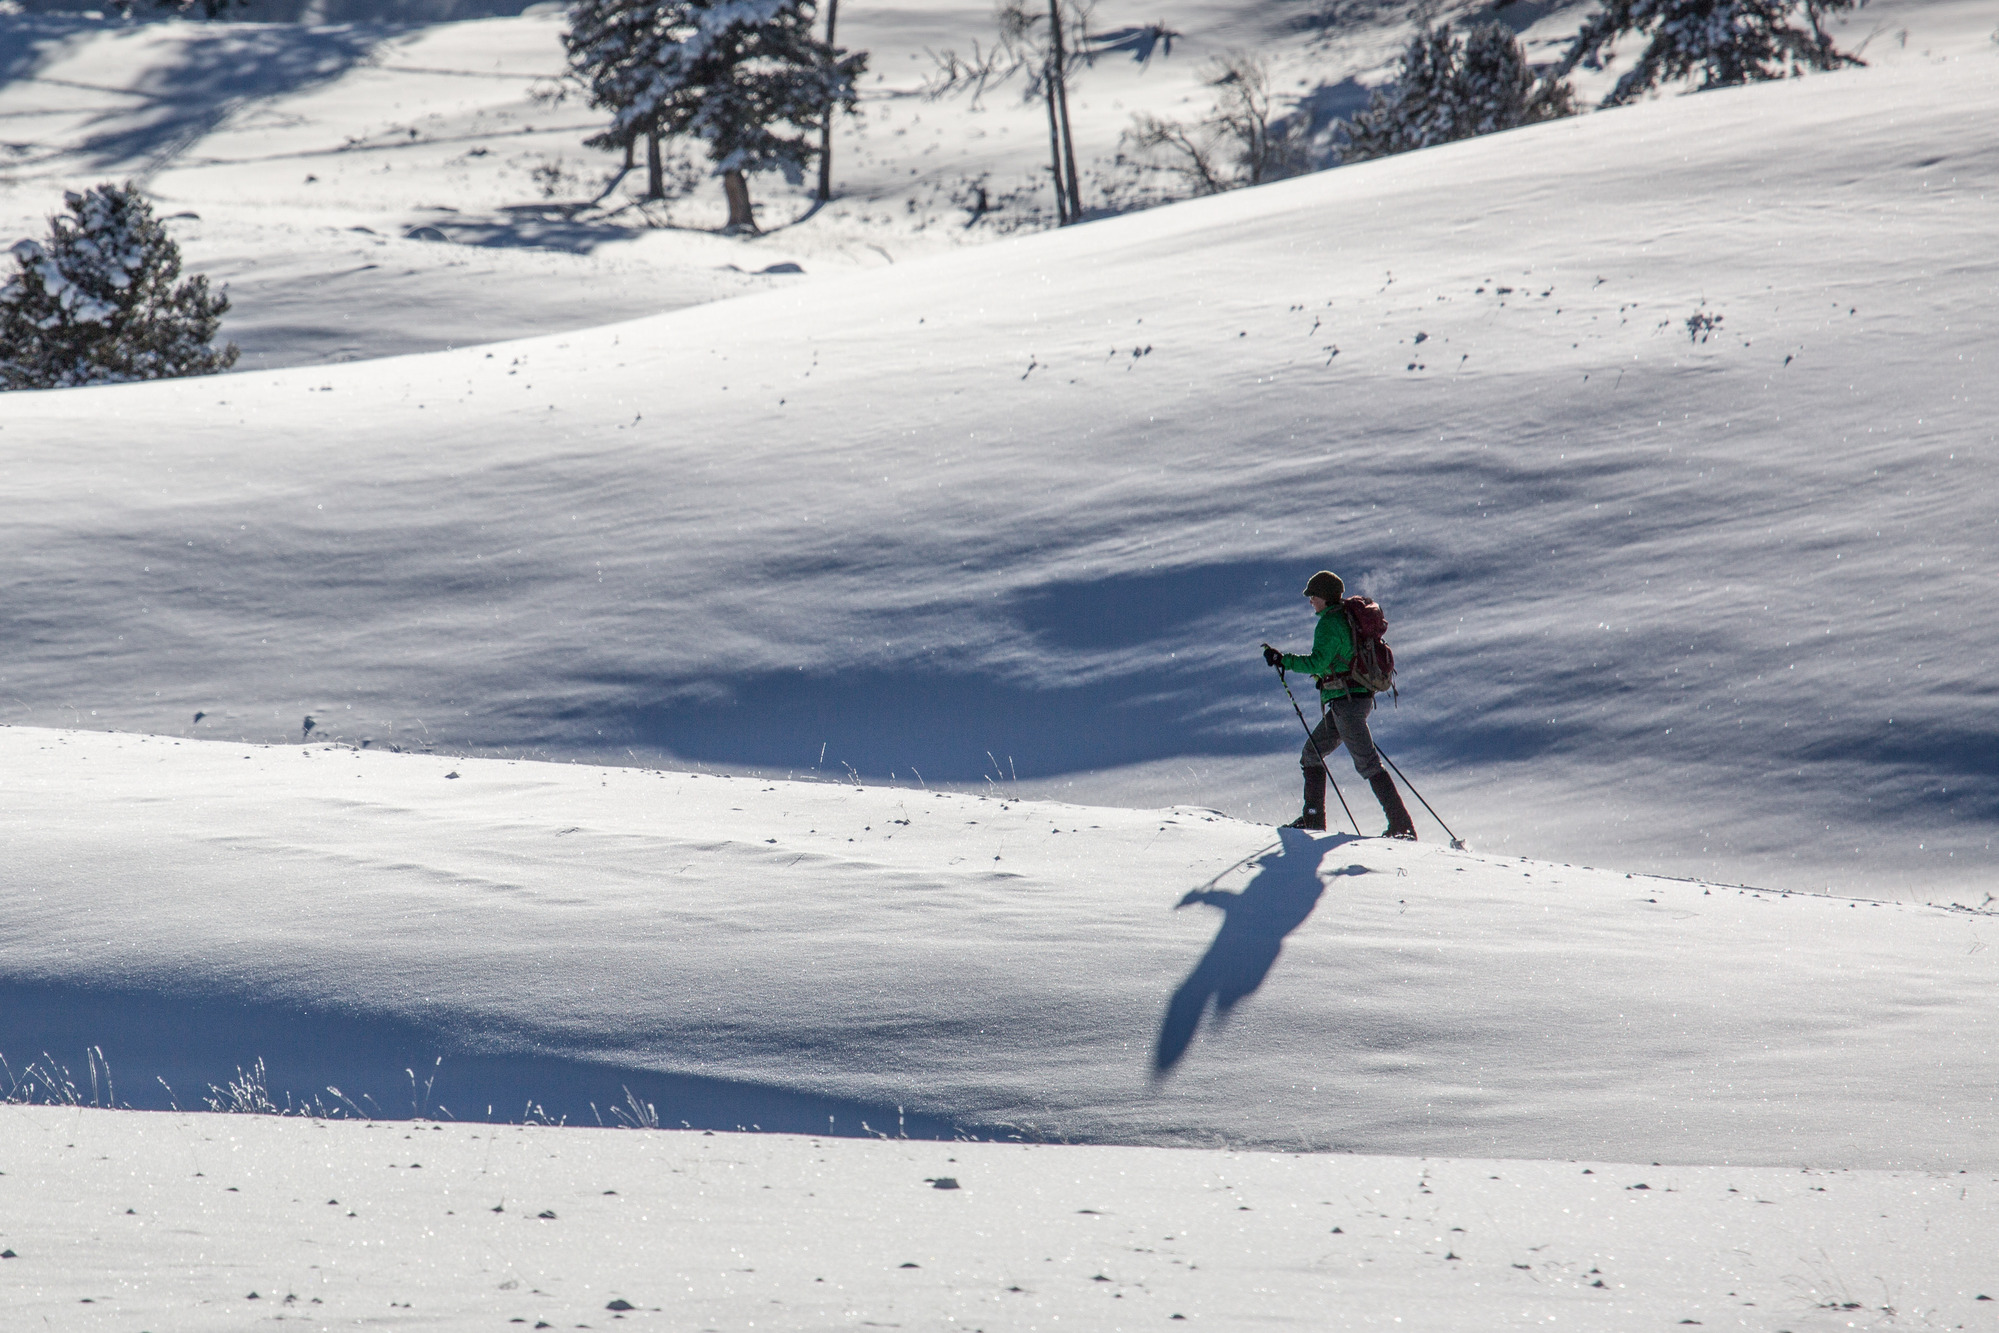 One skier skiing across a snowcovered, undulating  hill